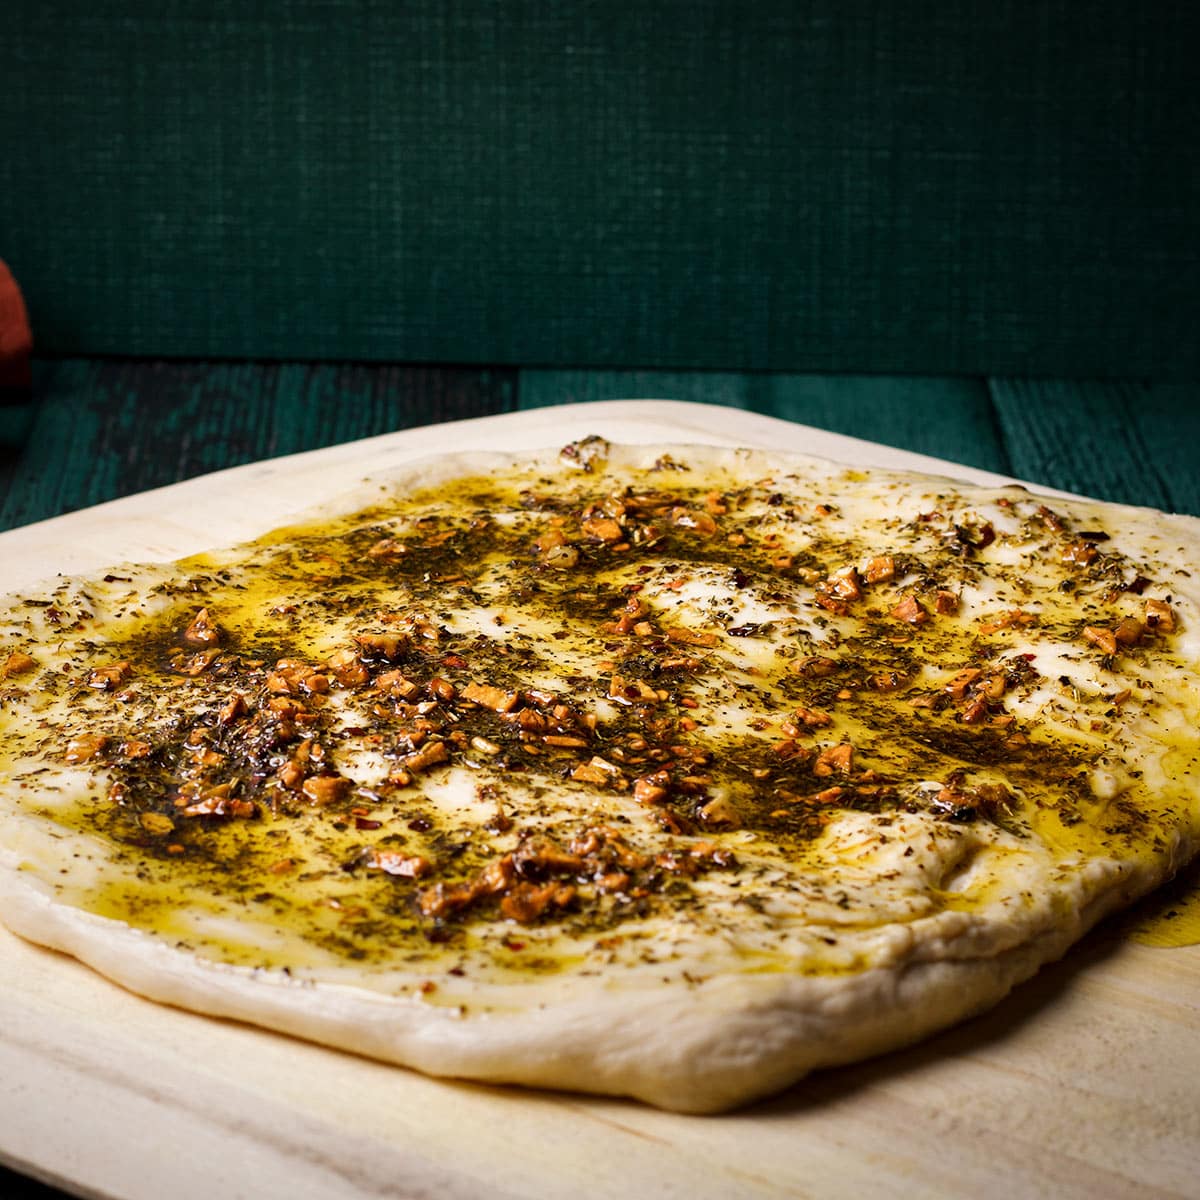 Homemade pizza dough covered in a thick layer of garlic and herb oil.